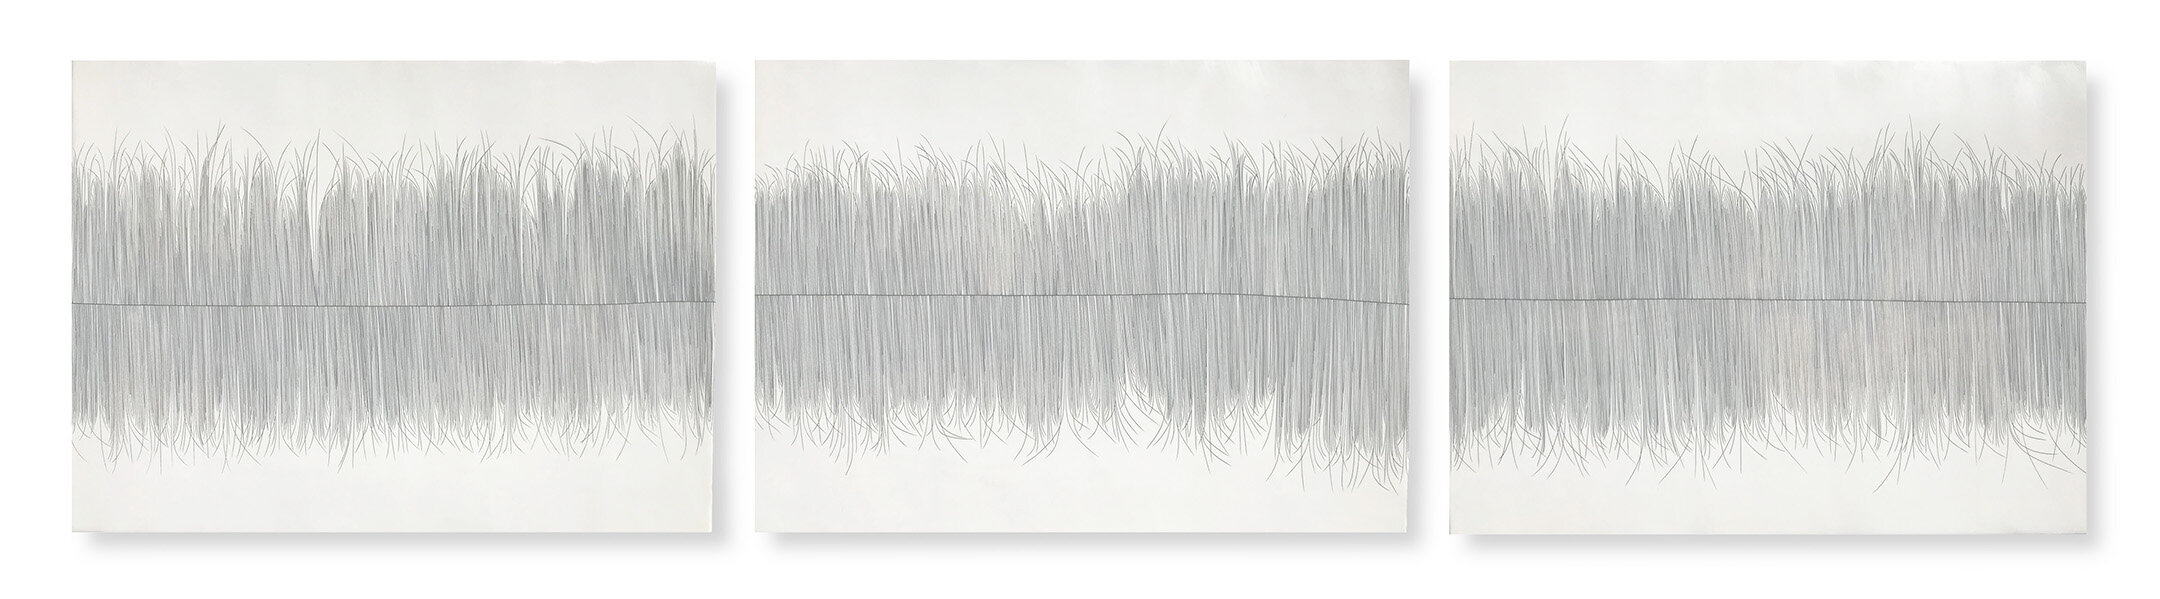  Threadline Echo, 2019 (sold) Encaustic, Oil 18 x 72 x 1.75 inches on panel   The Threadline Series is inspired by visual observations made in my studio environment, in nature and on neighborhood walks: left-over loops of thread; a crisp white line i